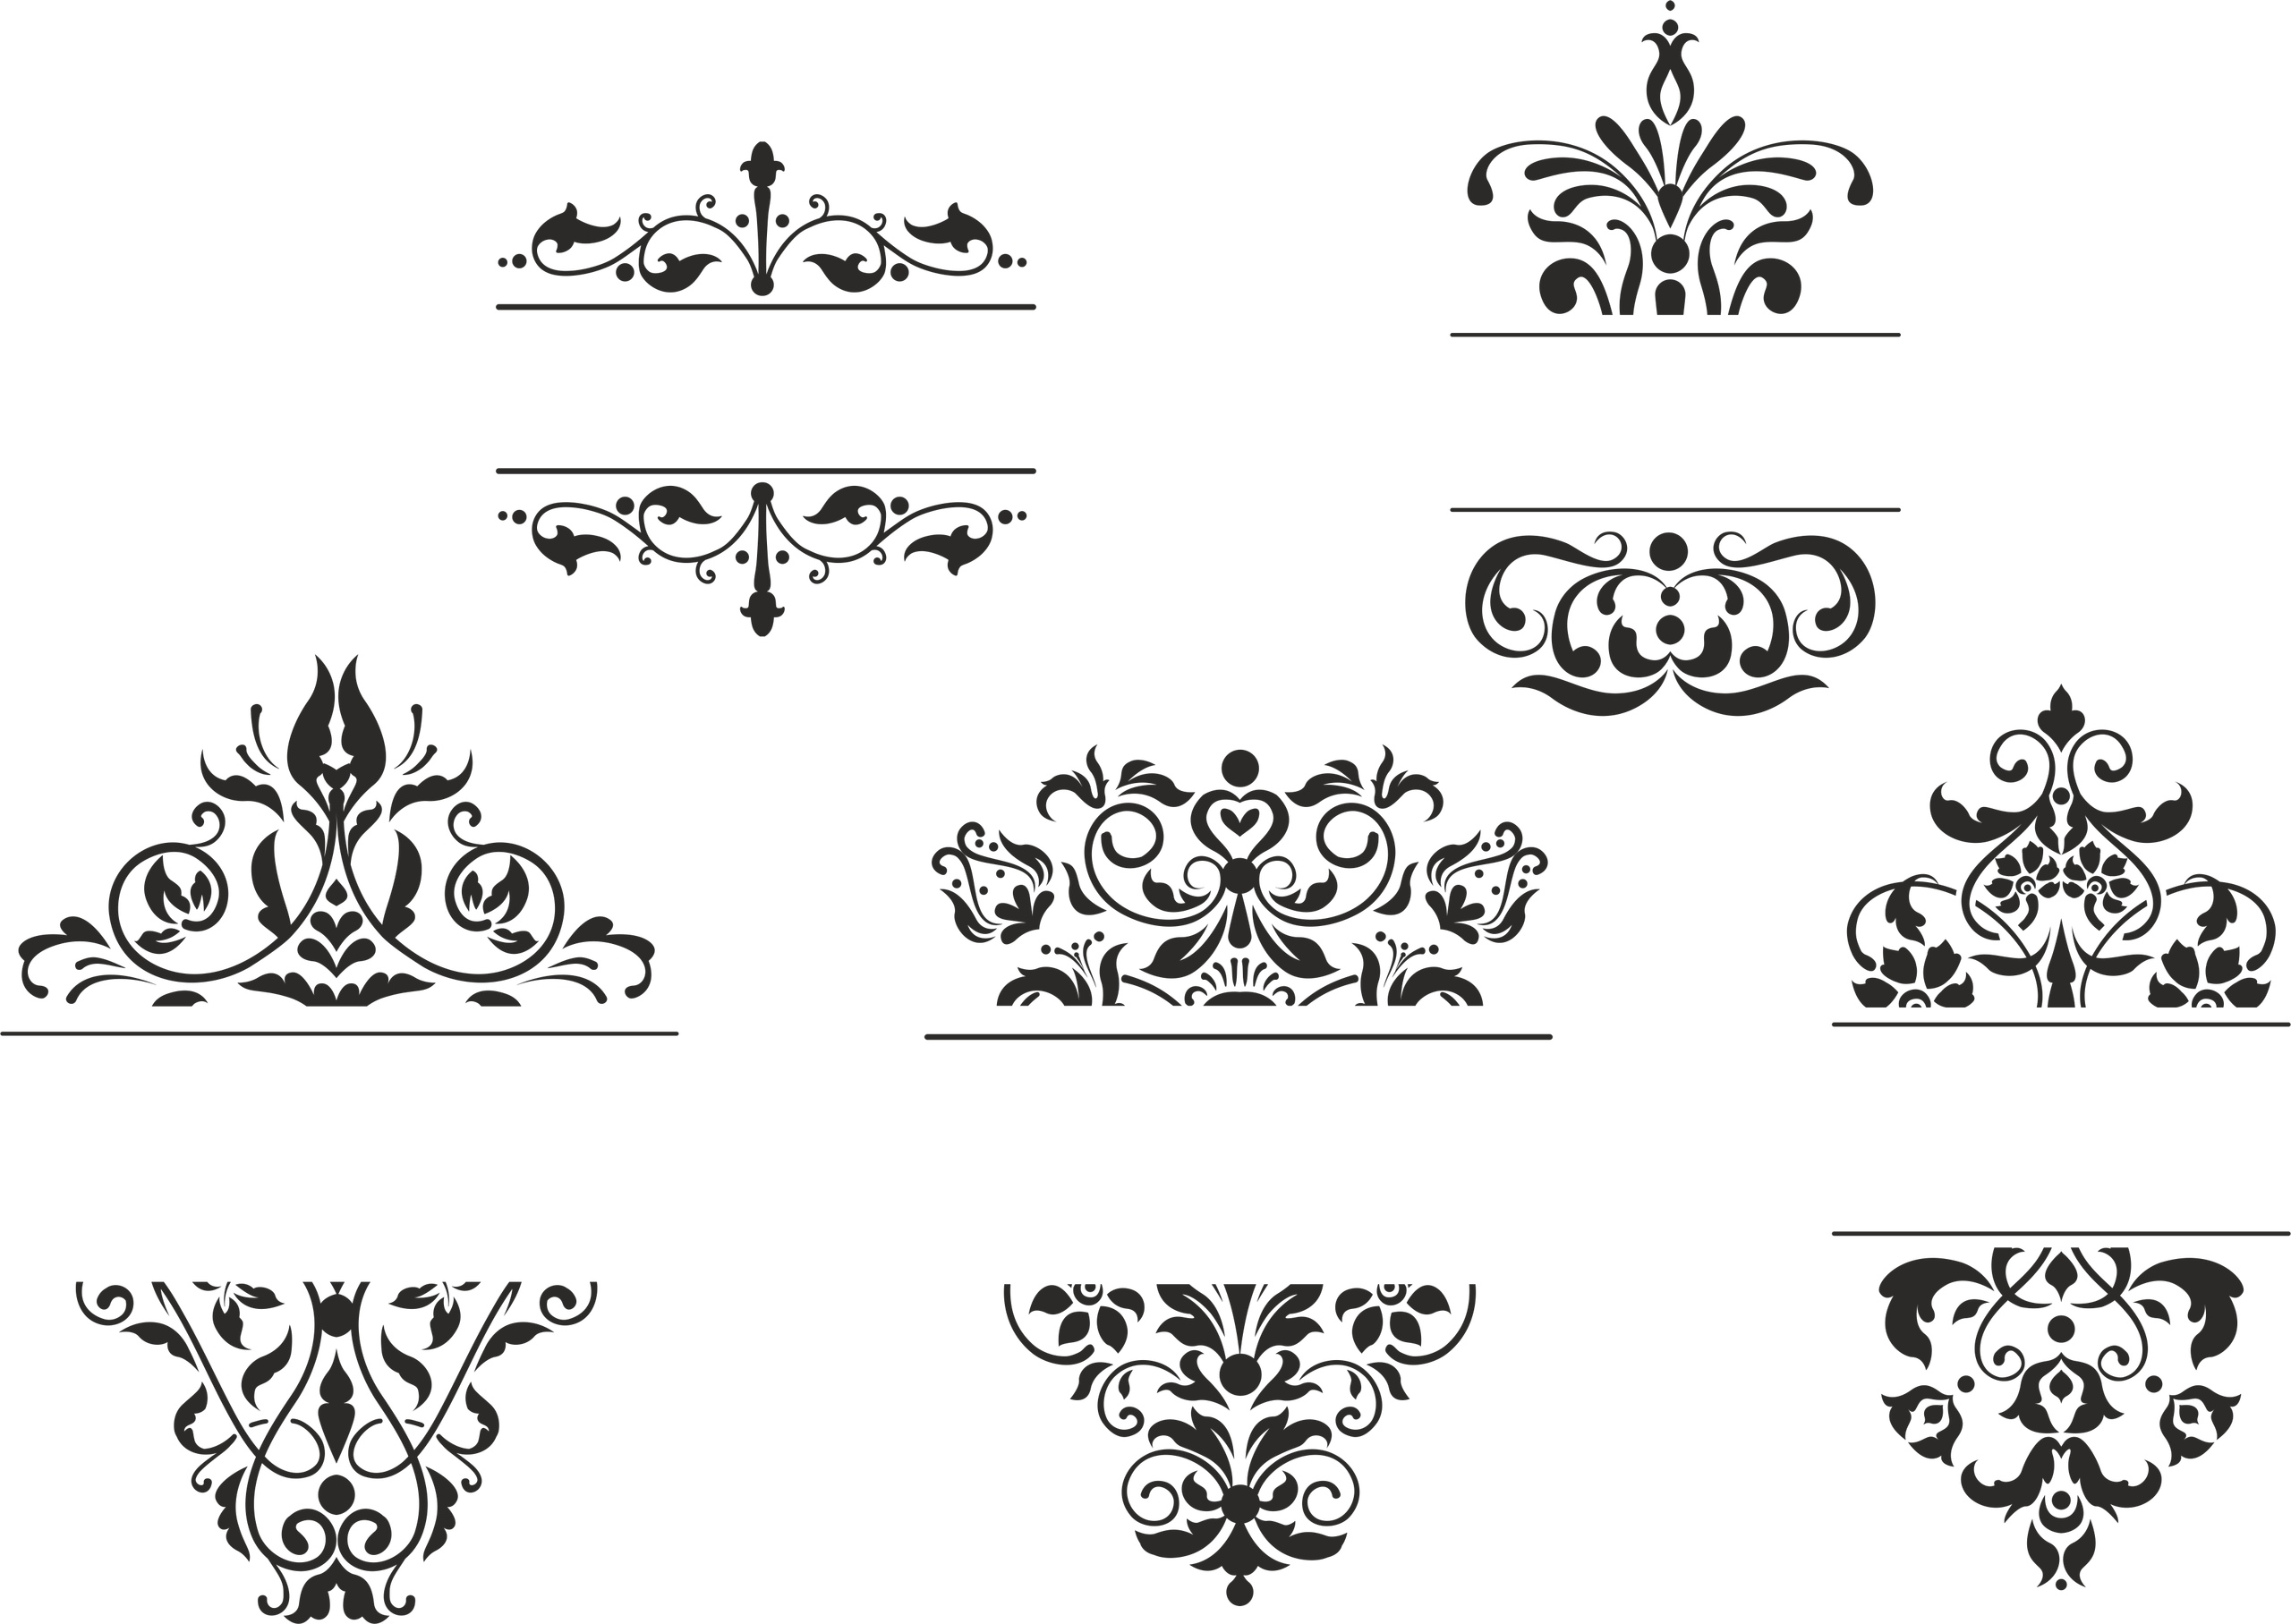 Download Ornament Frames Set Free Vector cdr Download - 3axis.co